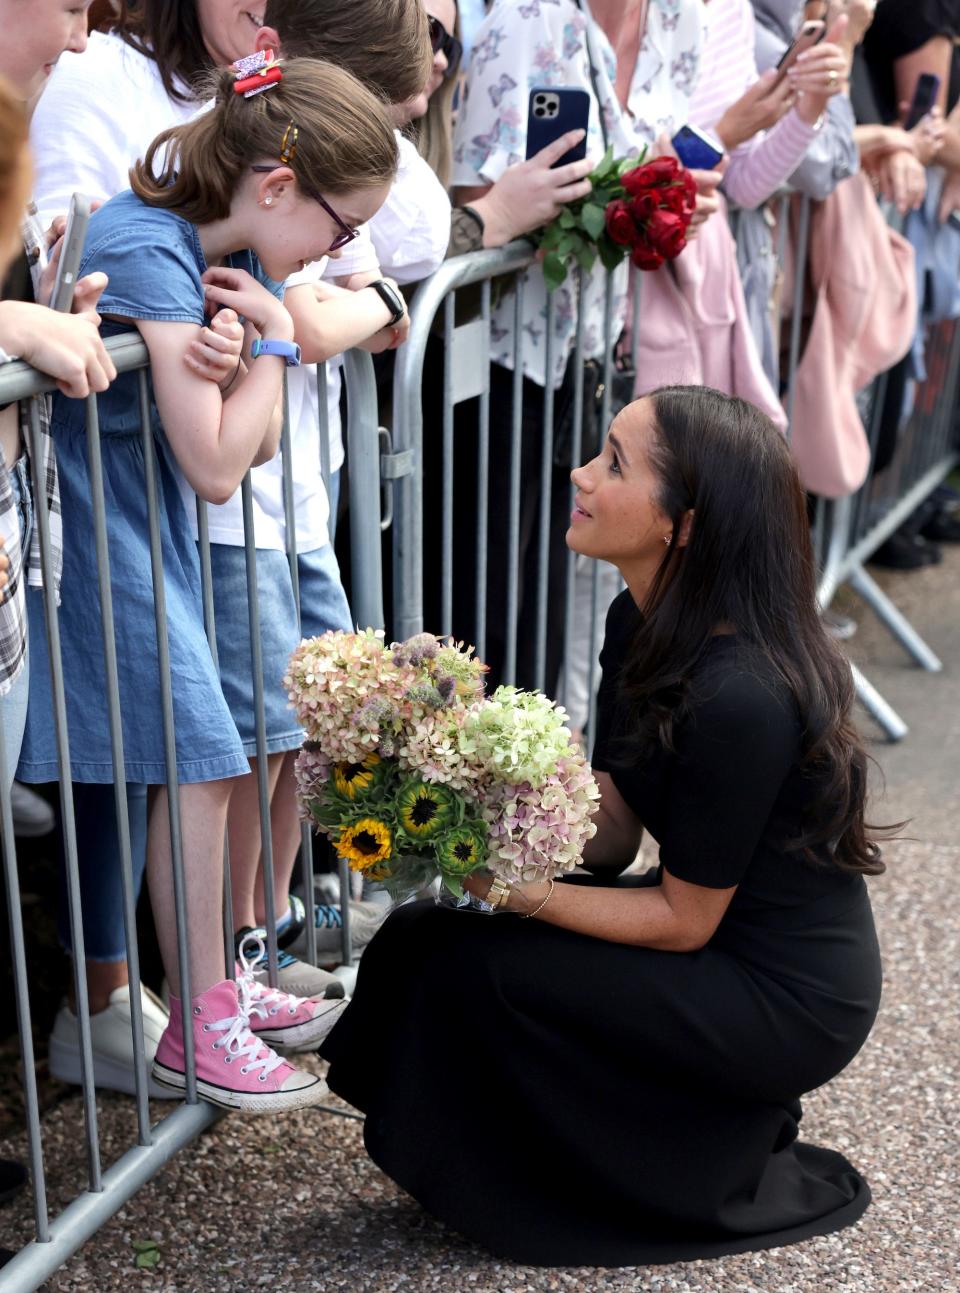 Meghan Markle kneels holding flowers to speak to a little girl who leans over a fence.